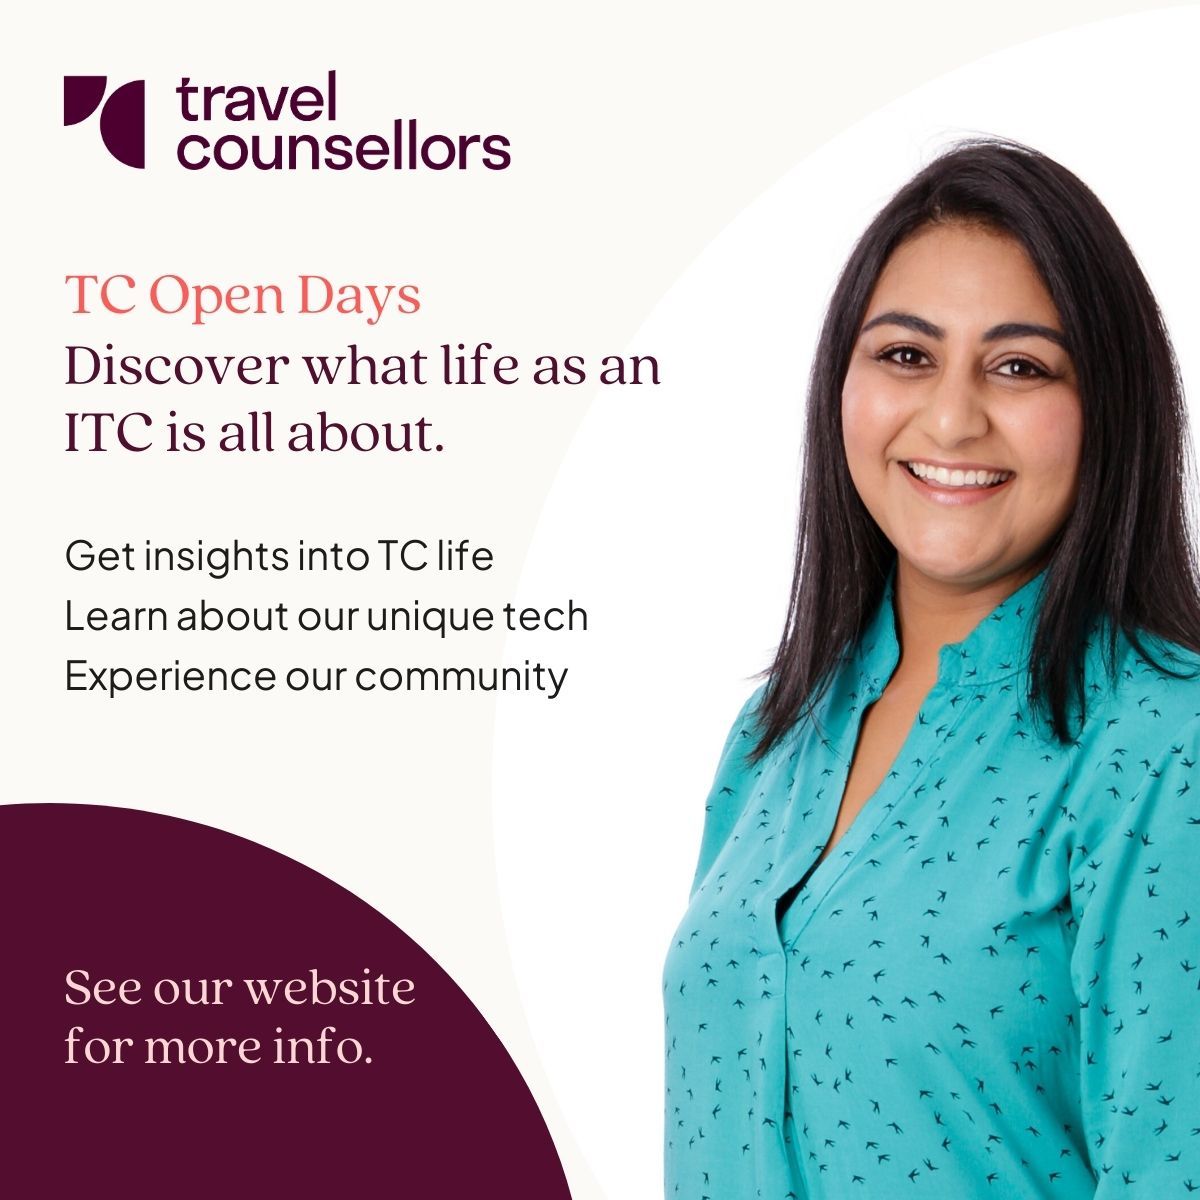 We're at the @atsandtonhotel today for our TC Open Day. Chat with Bianca Jones-King, from our franchise team, if you'd like to join us at one of our #TCOpenDays ☎️ 082 936 1180. 
#lovewhatyoudo #travelcareers #wearetravelcounsellors